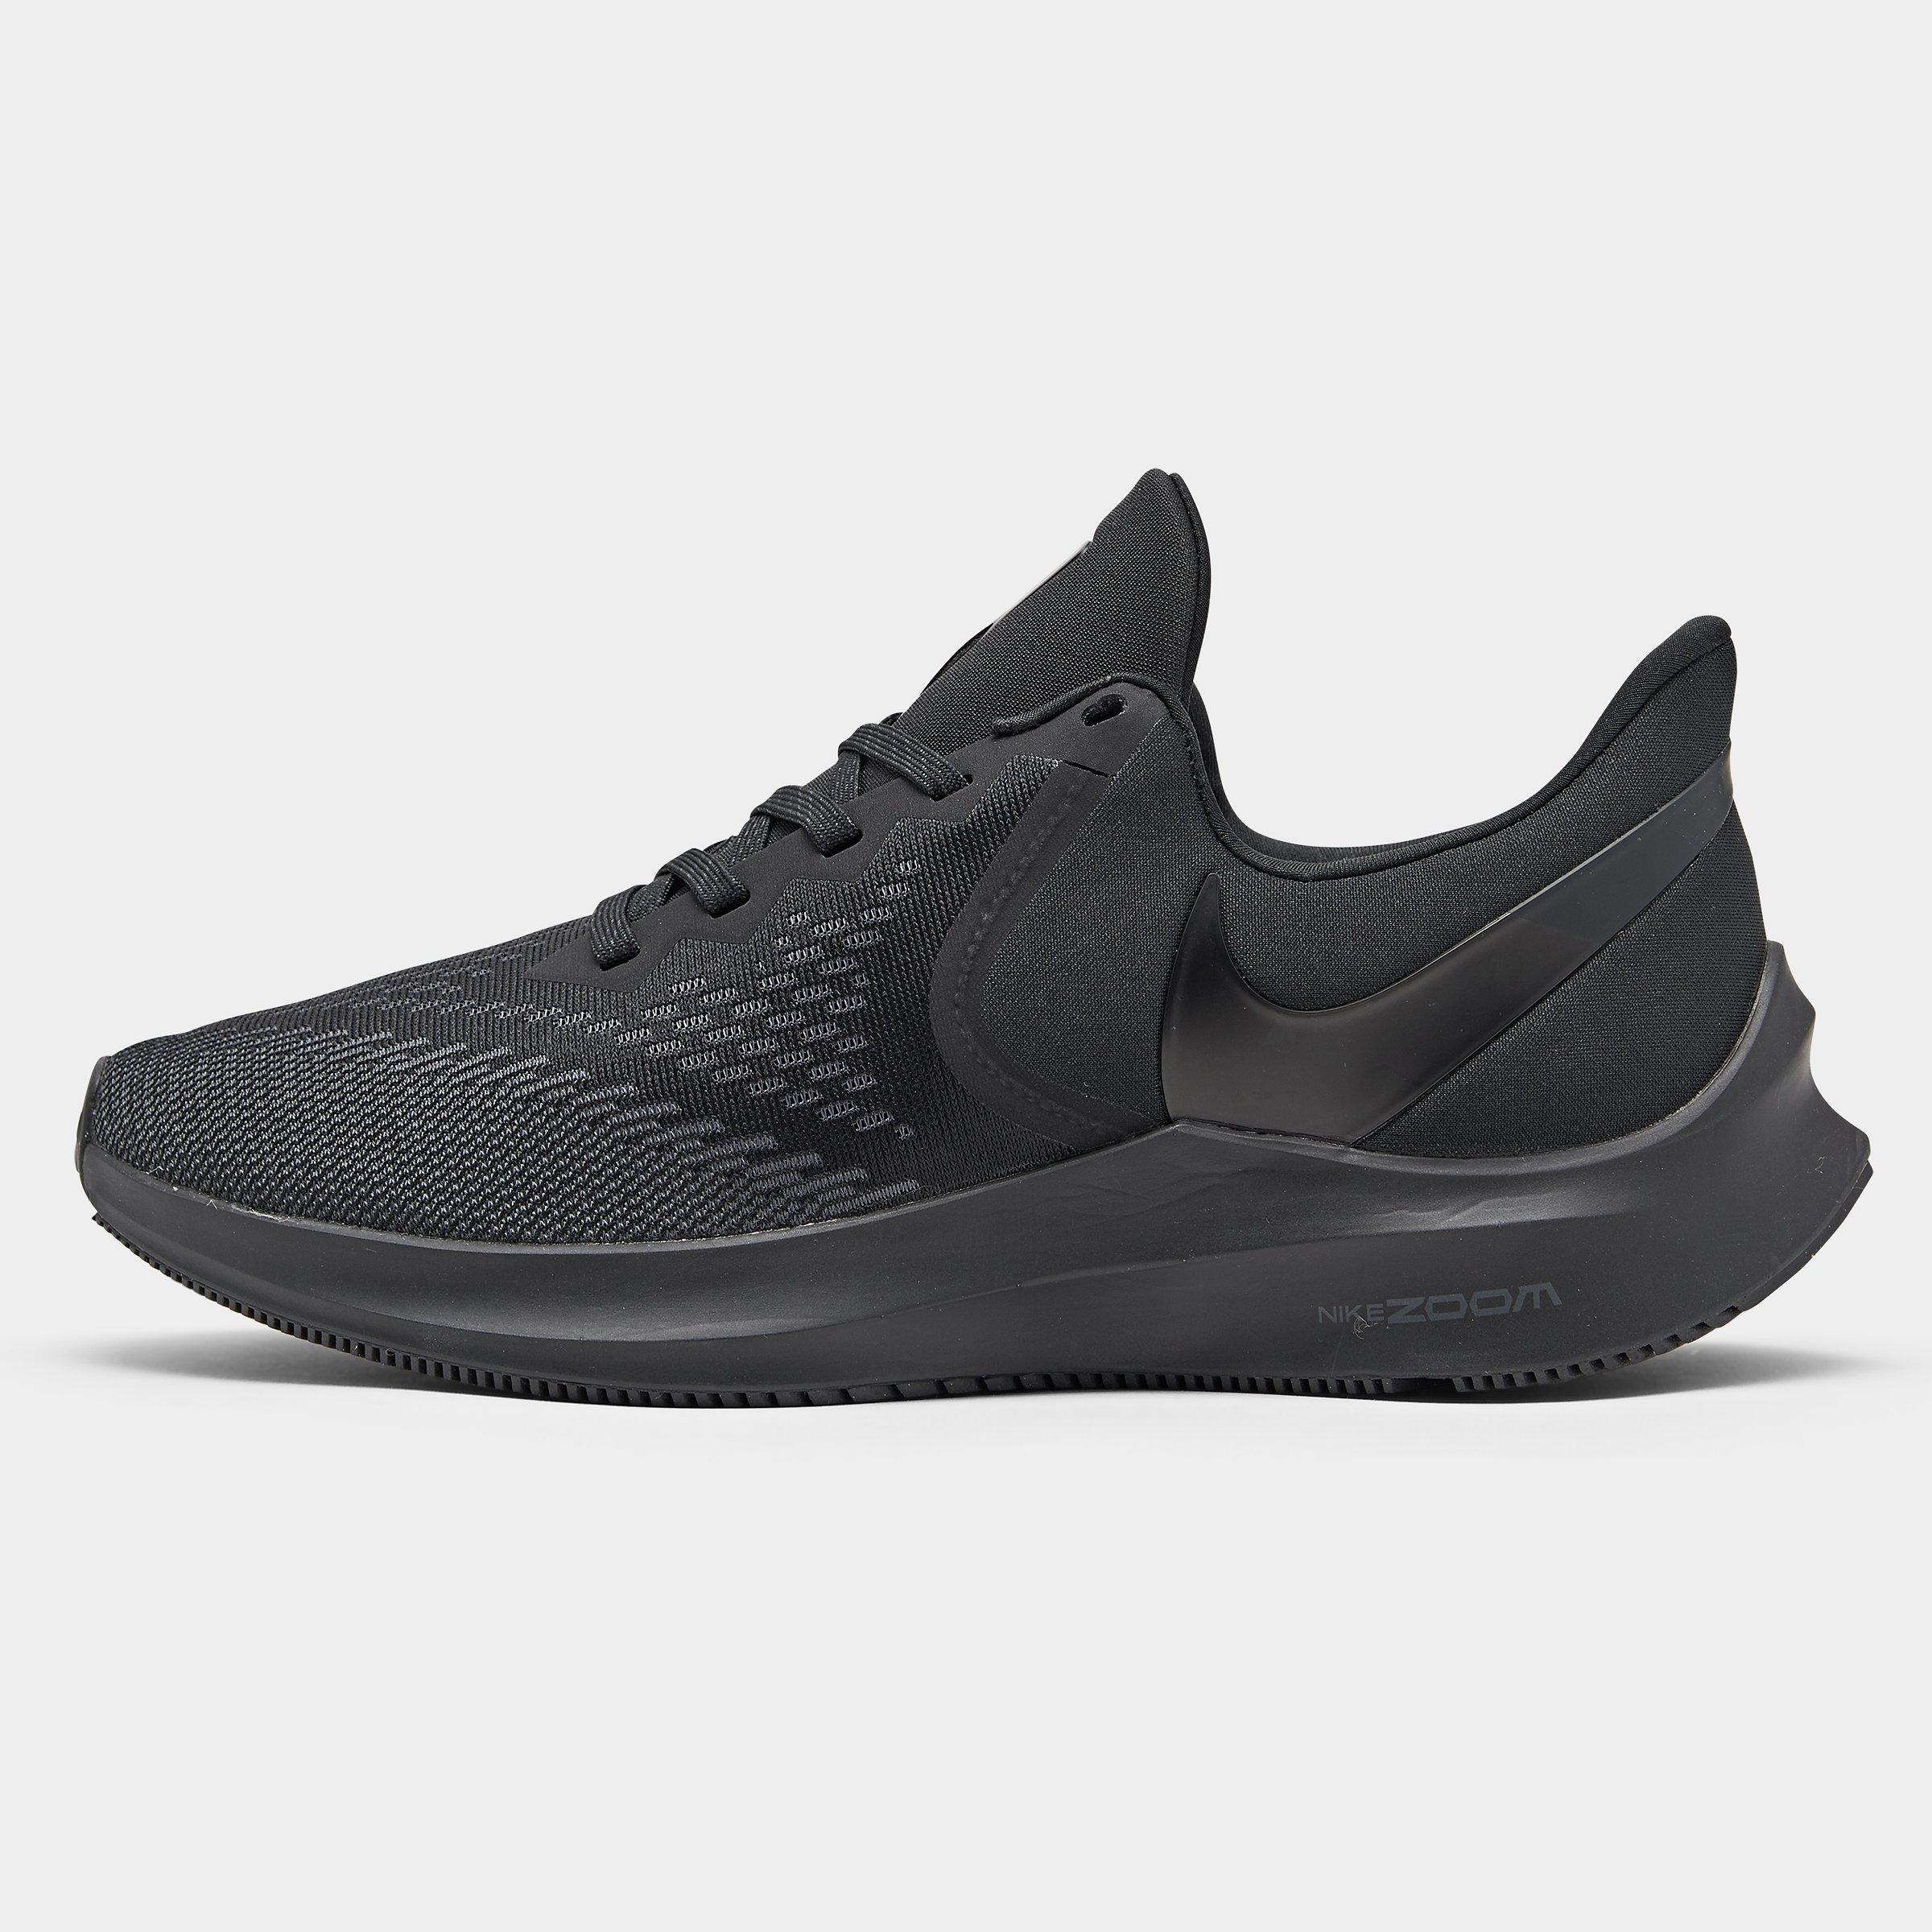 Nike Air Zoom Winflo 6 Running Shoes 